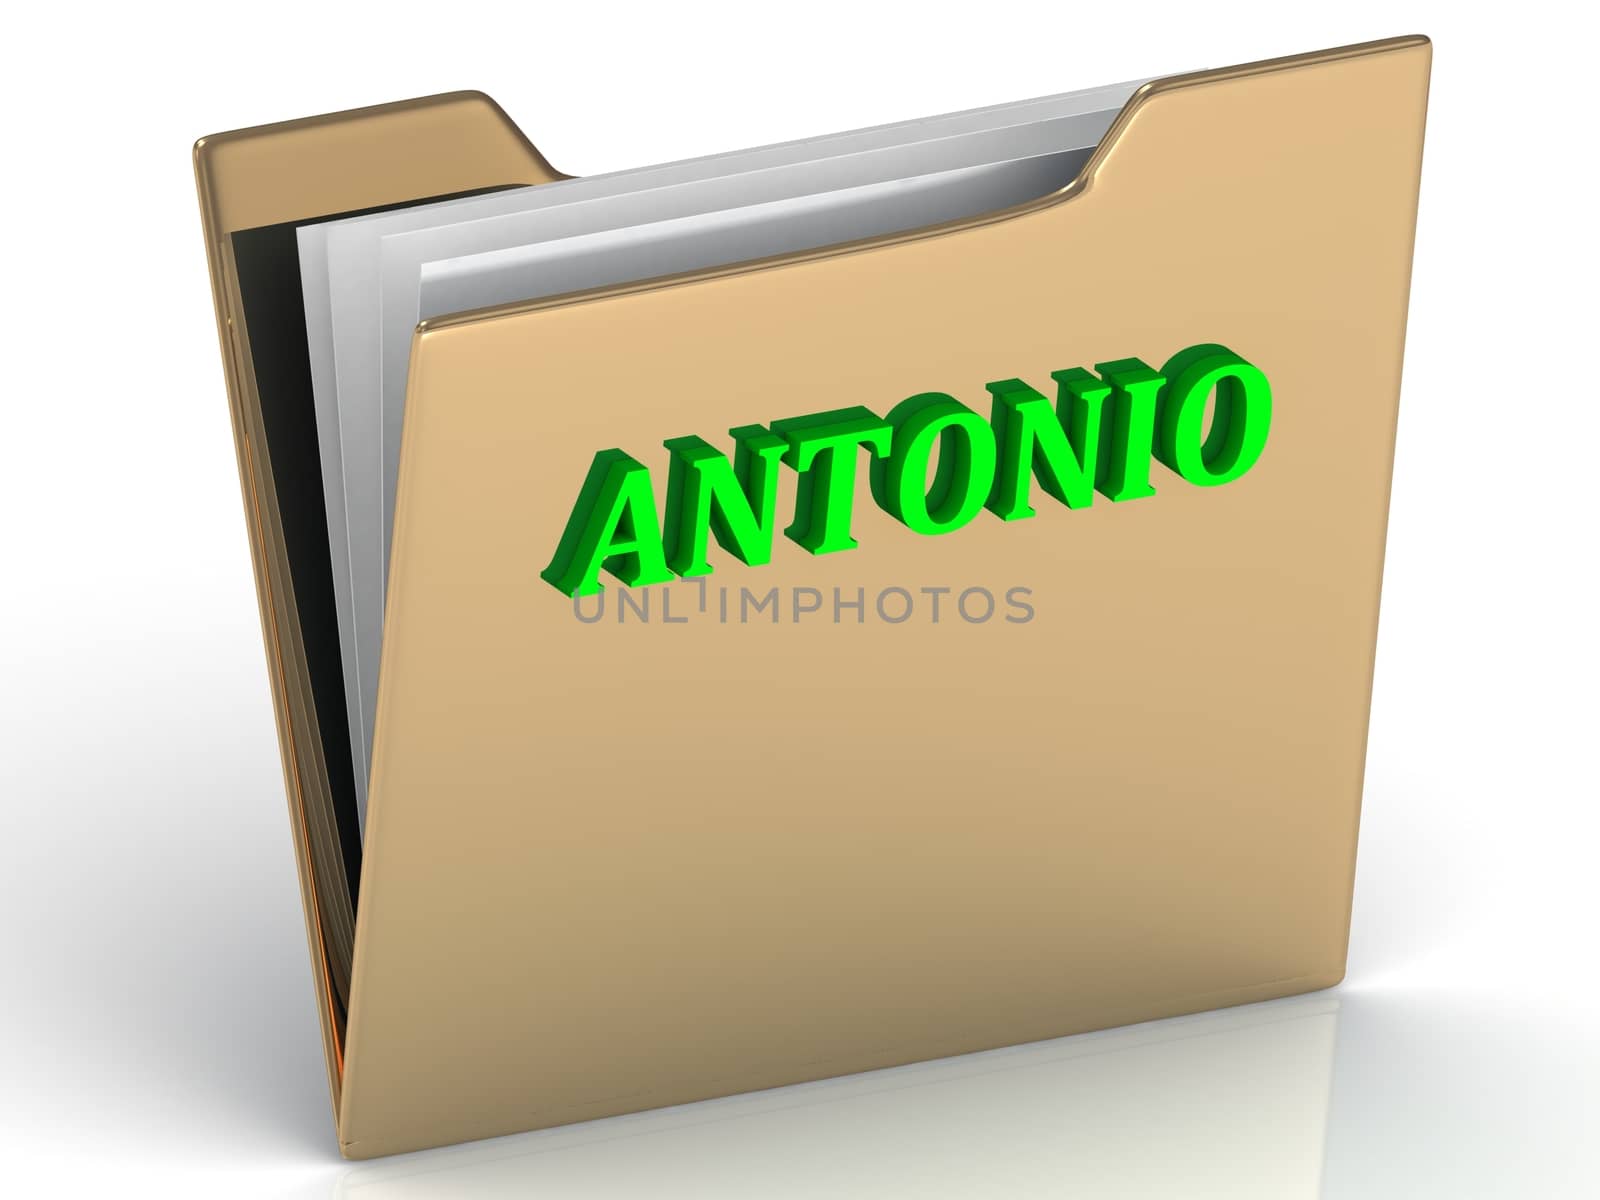 ANTONIO- bright green letters on gold paperwork folder by GreenMost